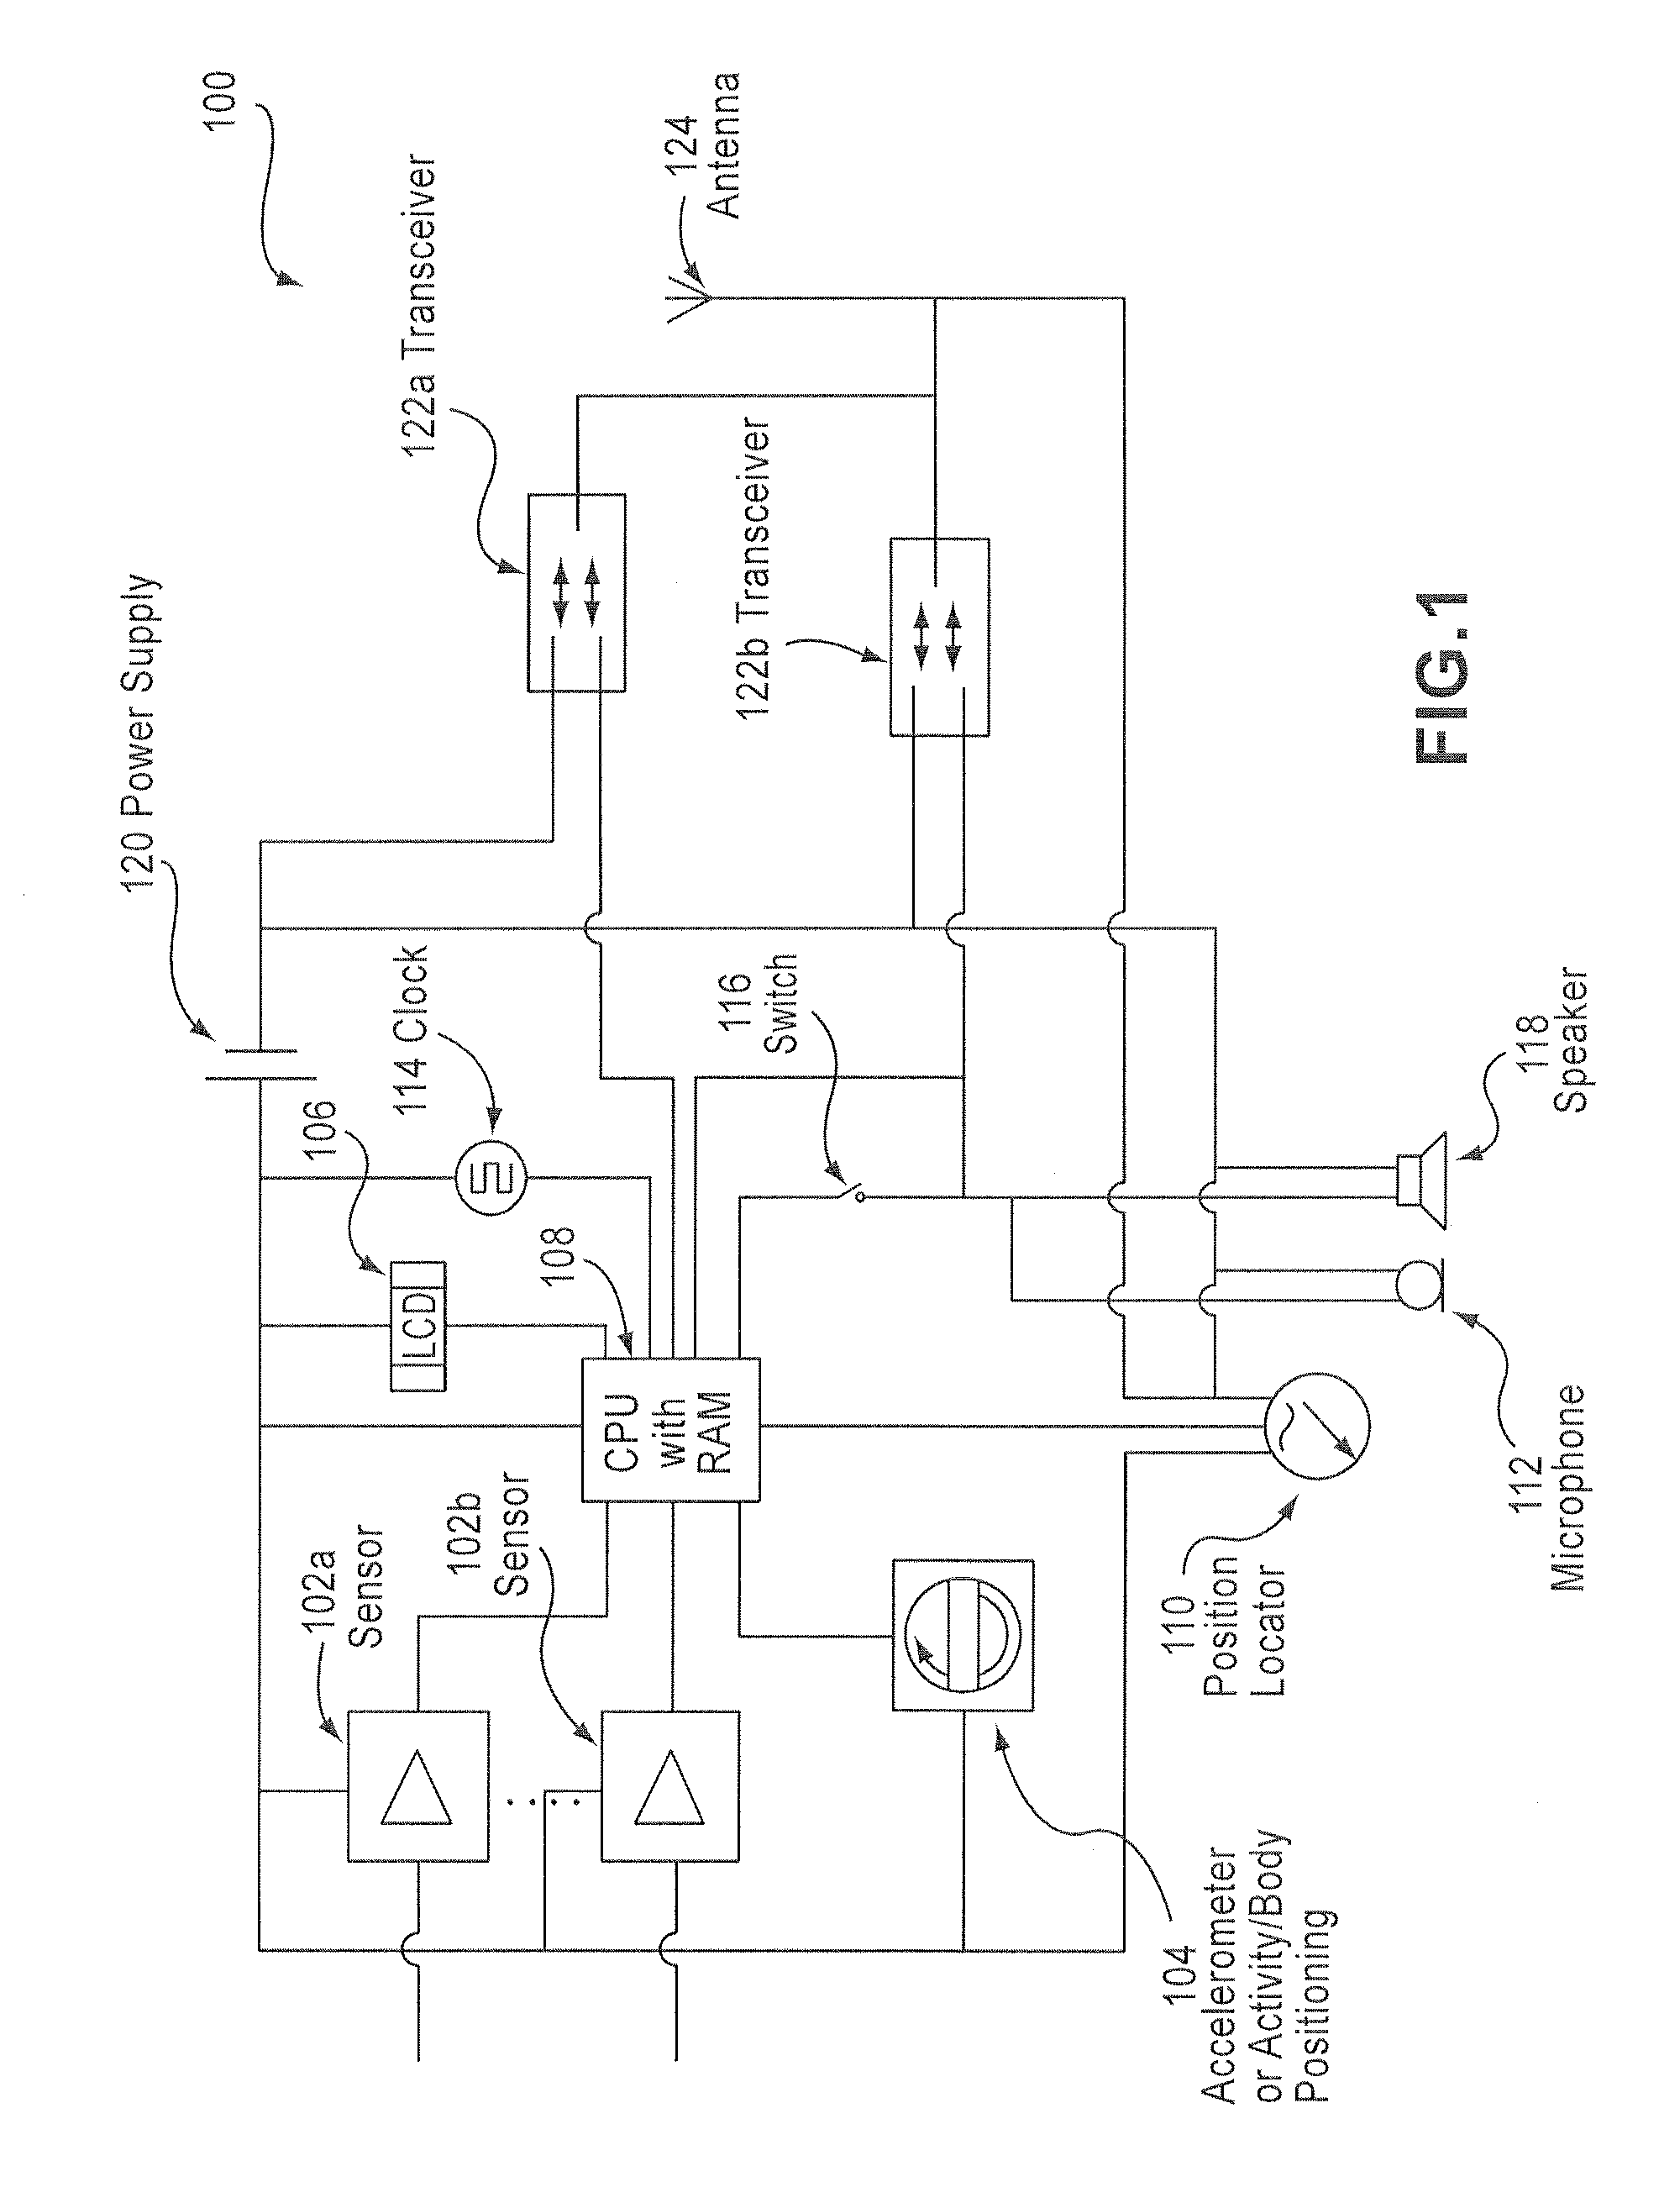 System and method for physiological data readings, transmission and presentation